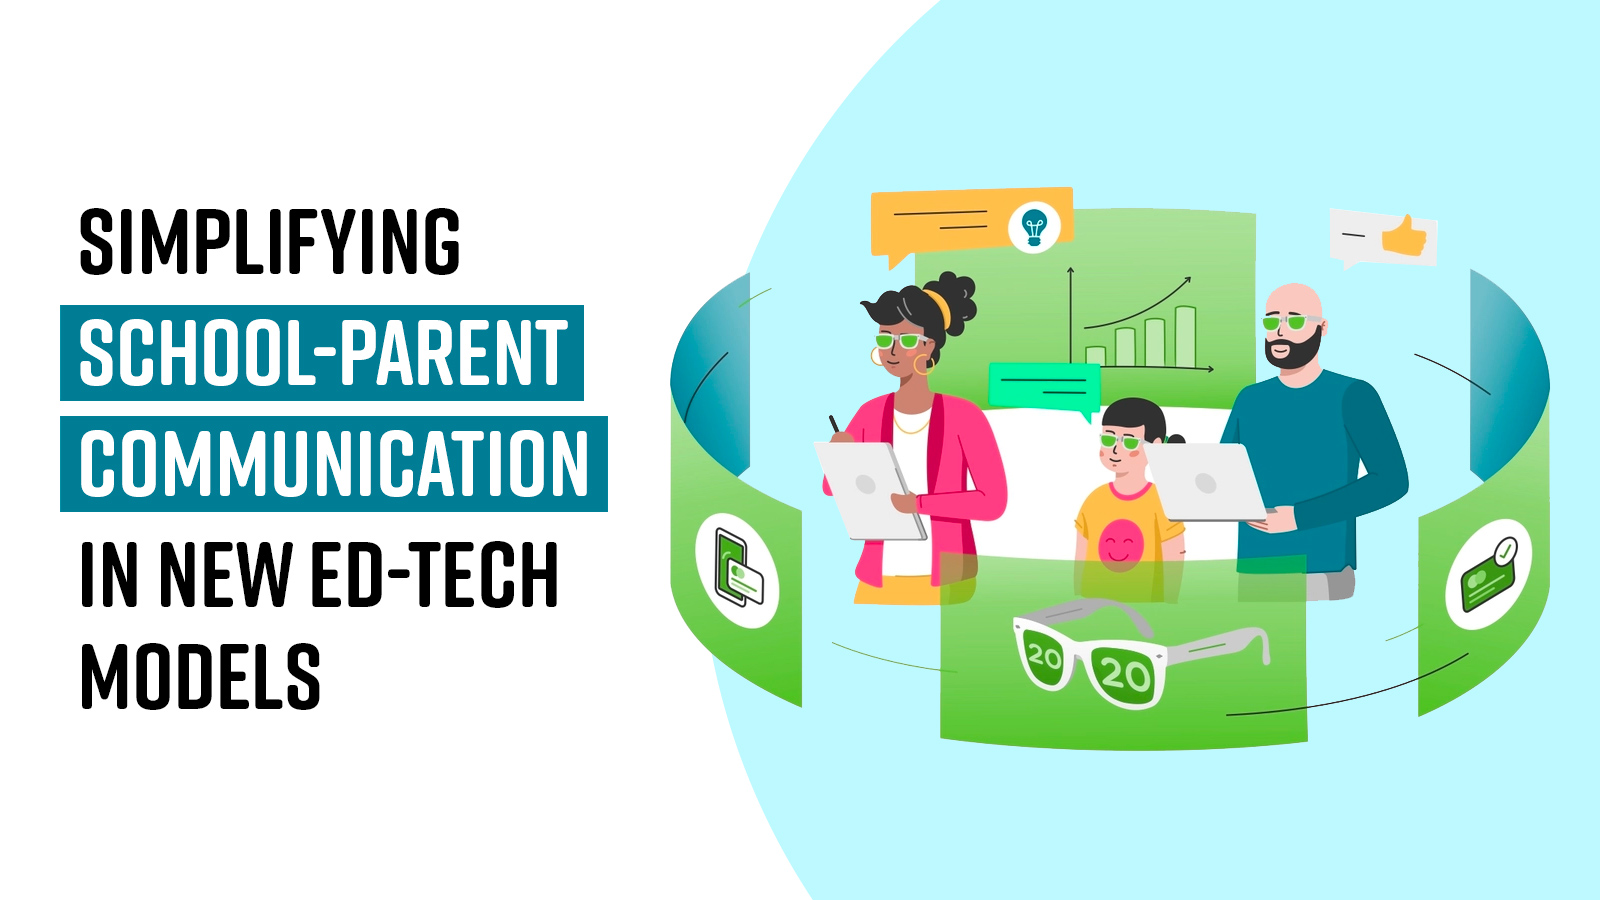 Simplifying School-Parent communication in new Ed-Tech models